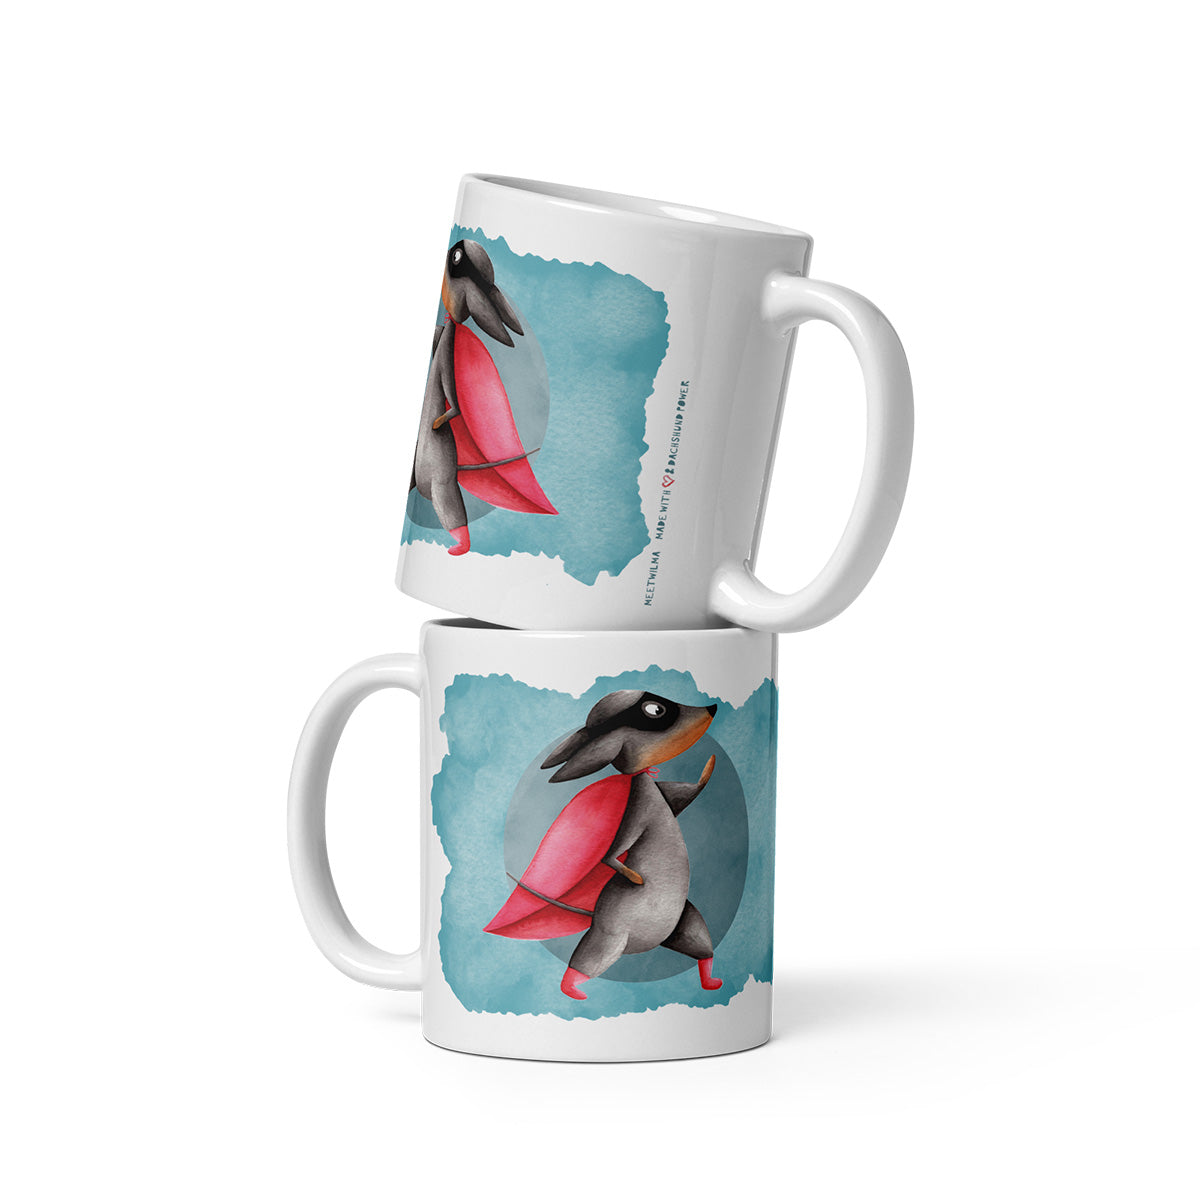 2 stacked Mugs with a Dachshund wearing a cape watercolor Illustration print - 11oz